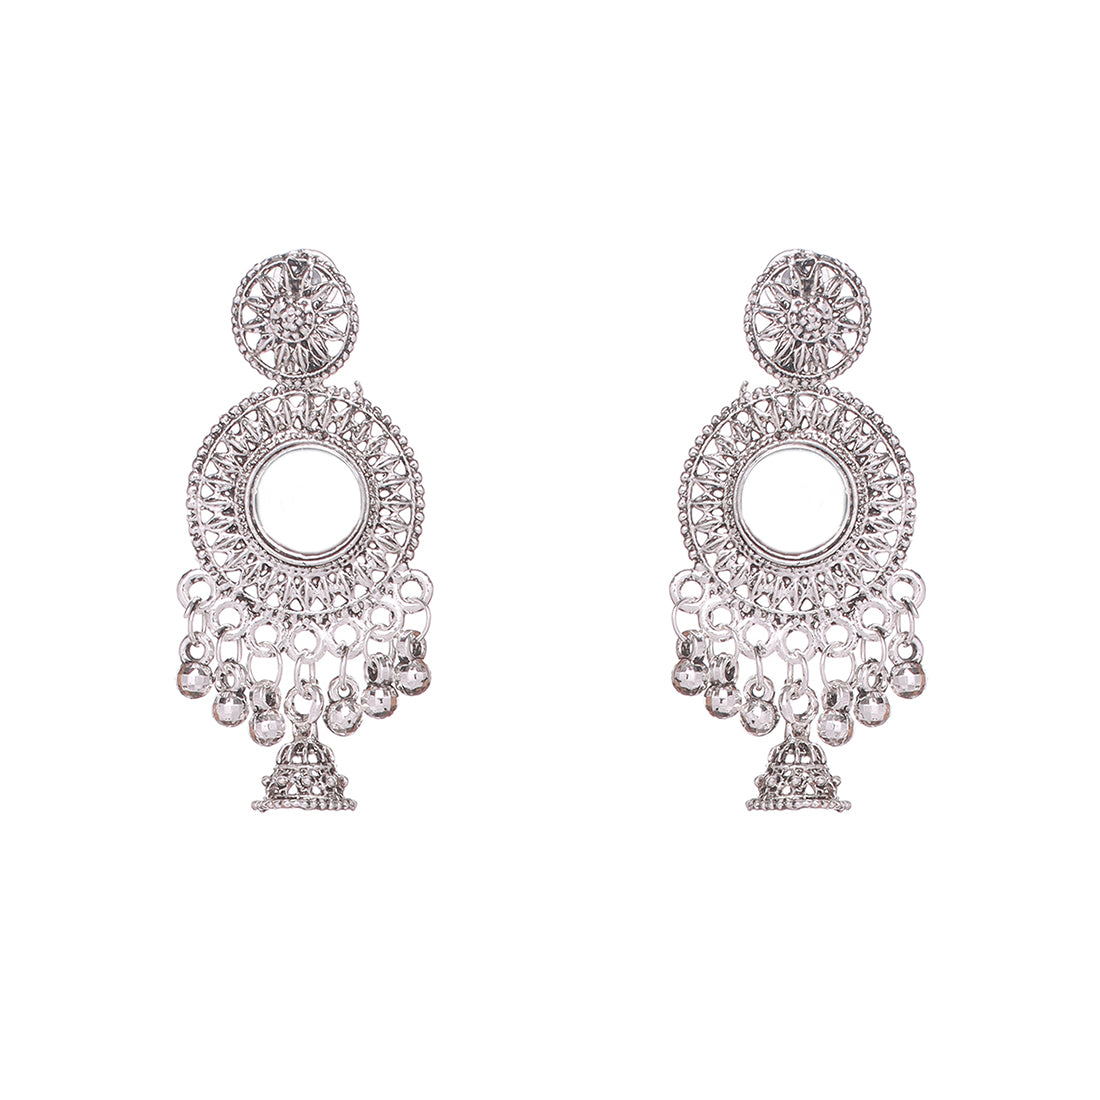 Set Of 2 Ethnic Silver Small Jhumki Danglers With Mirror Work Accent